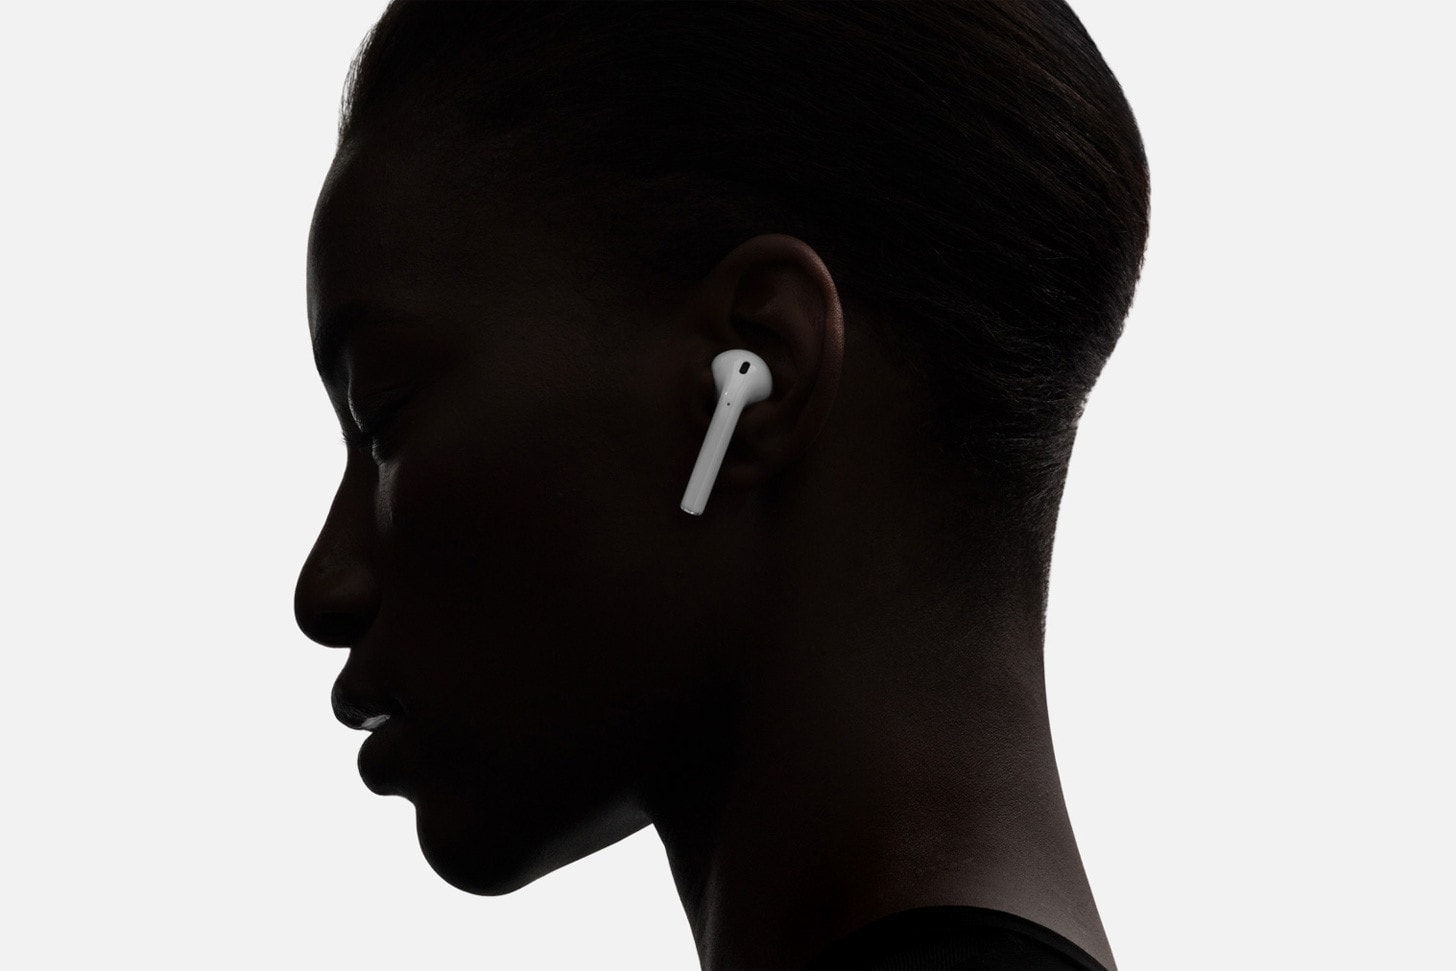 Noise Cancelling Apple Airpods Rumor 2019 iPhone over ear headphones release date info drop